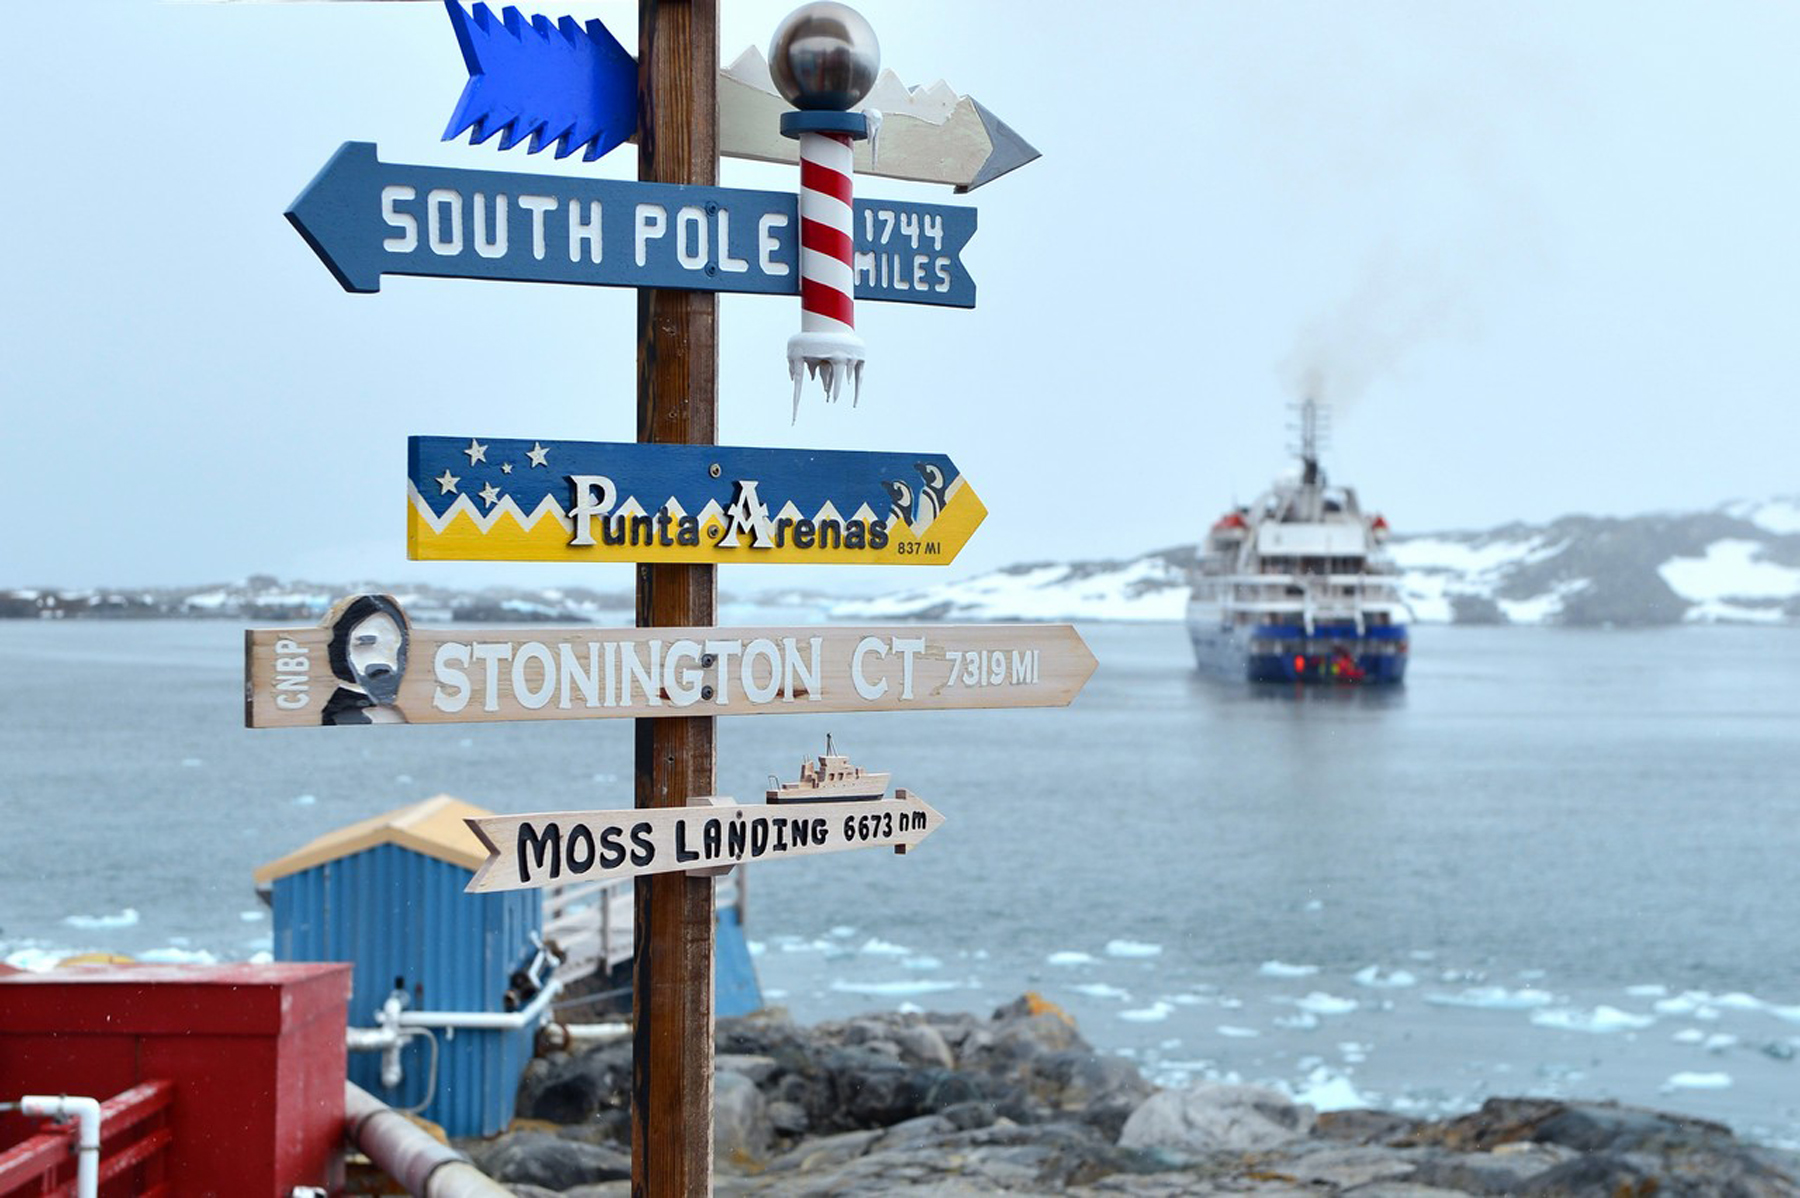 Antarctica – Home to Glaciers, Penguins, and Competitive Jobs